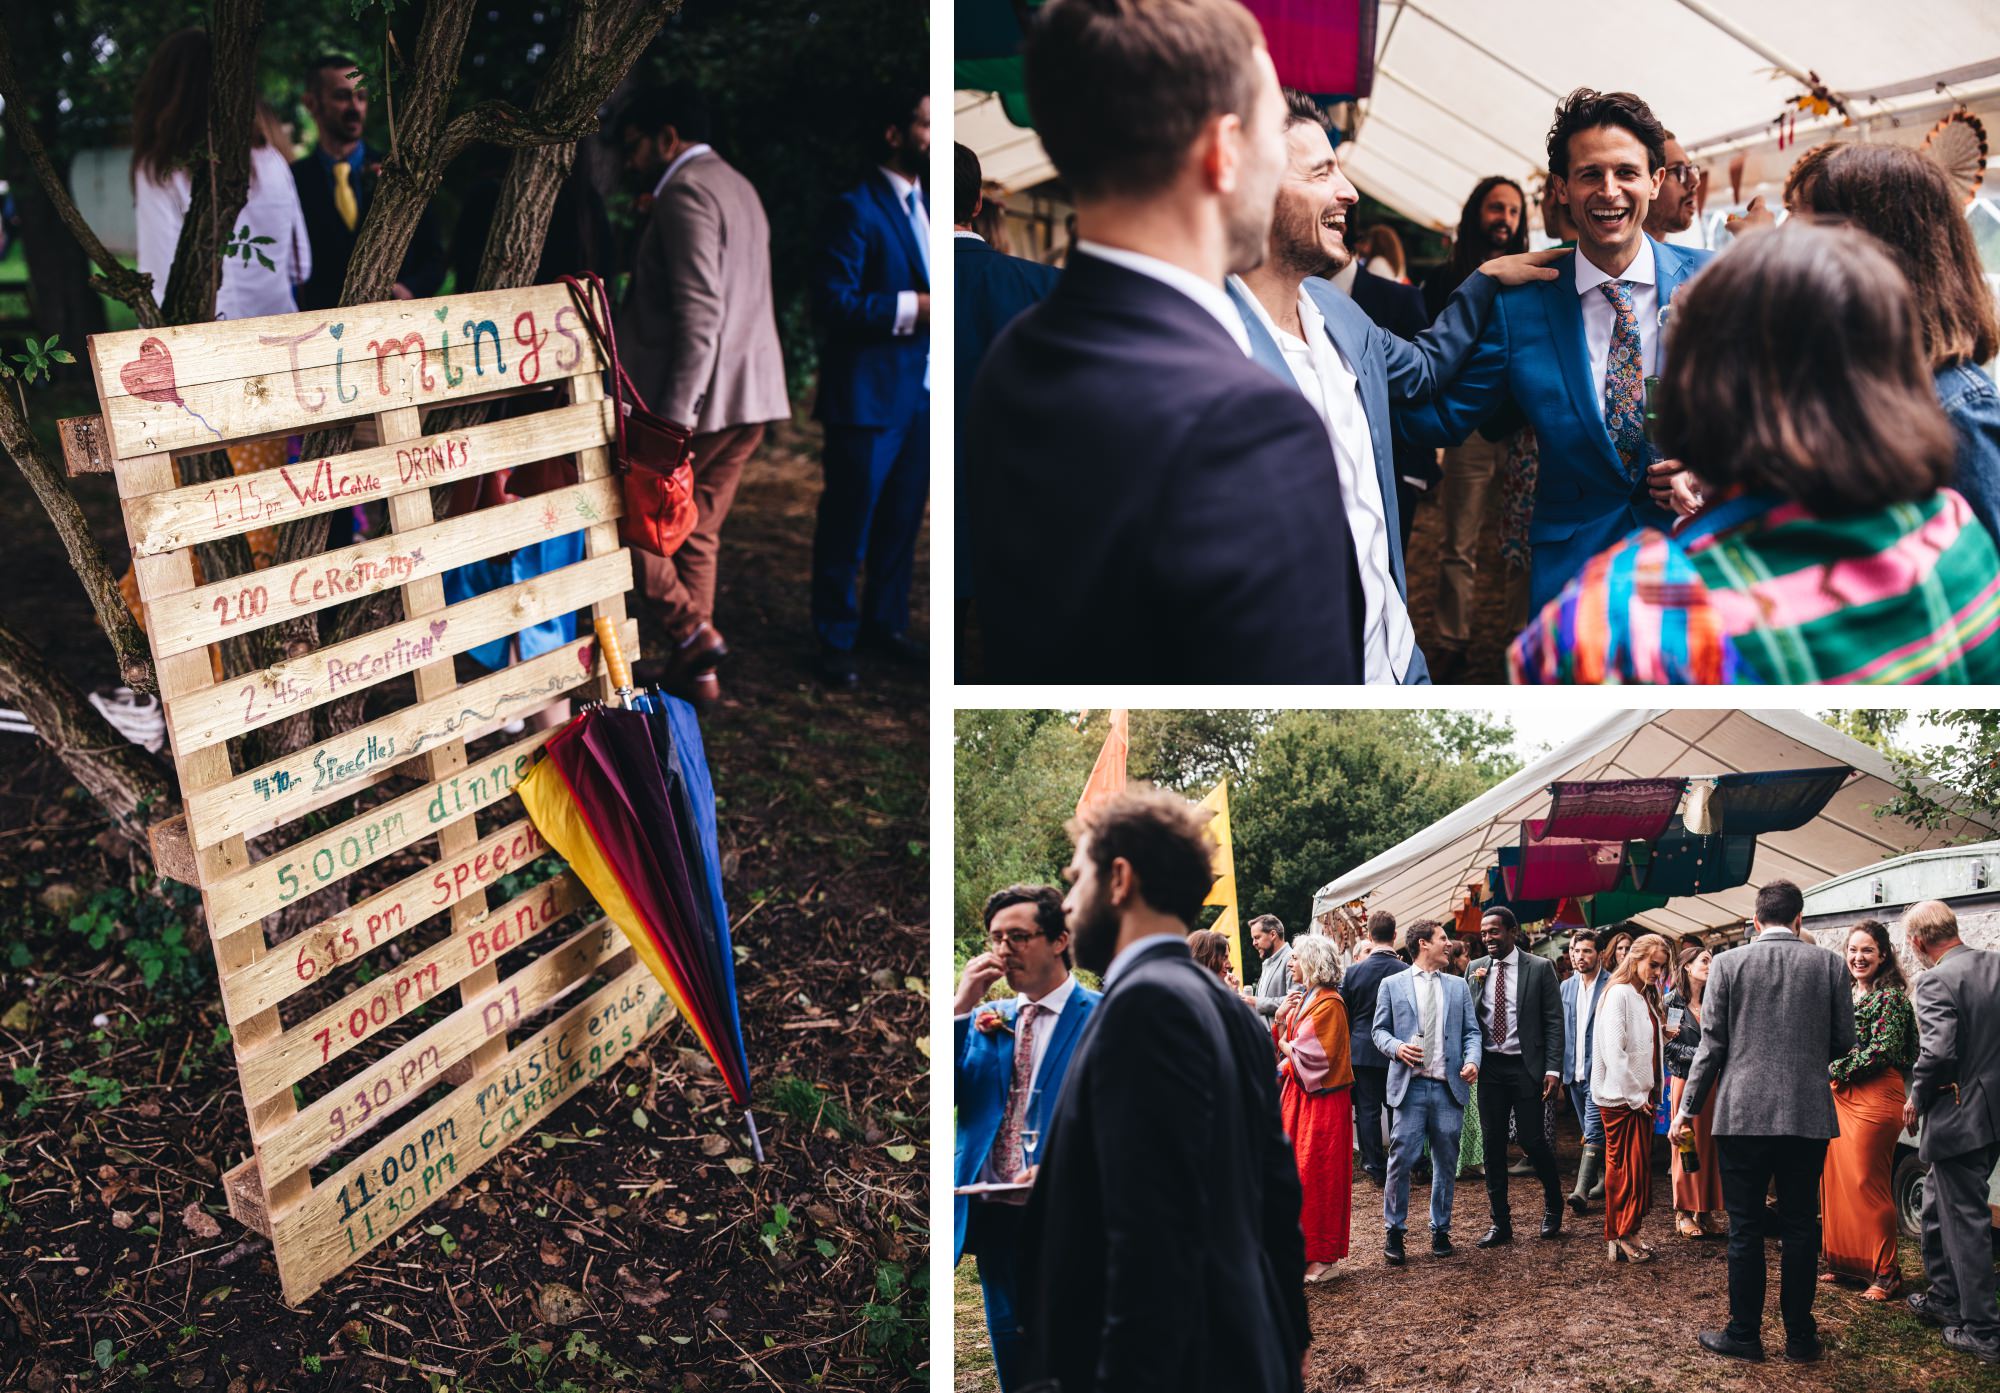 wedding schedule on wooden pallet, weddiing guests laughing and smiling, talking chatting